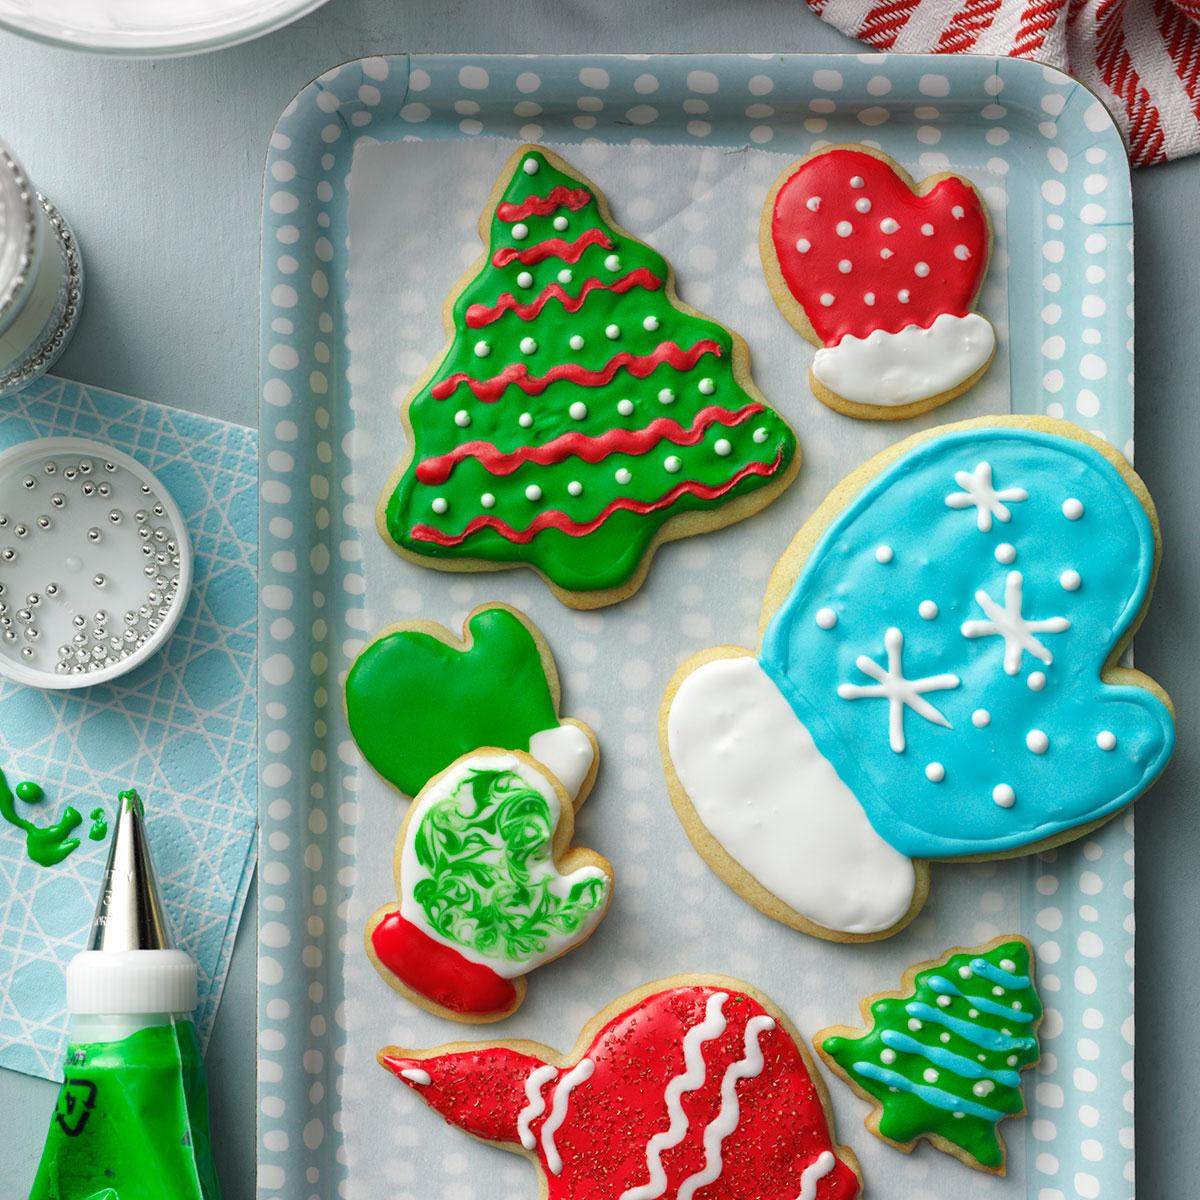 Pictures Of Christmas Cookies
 Holiday Cutout Cookies Recipe